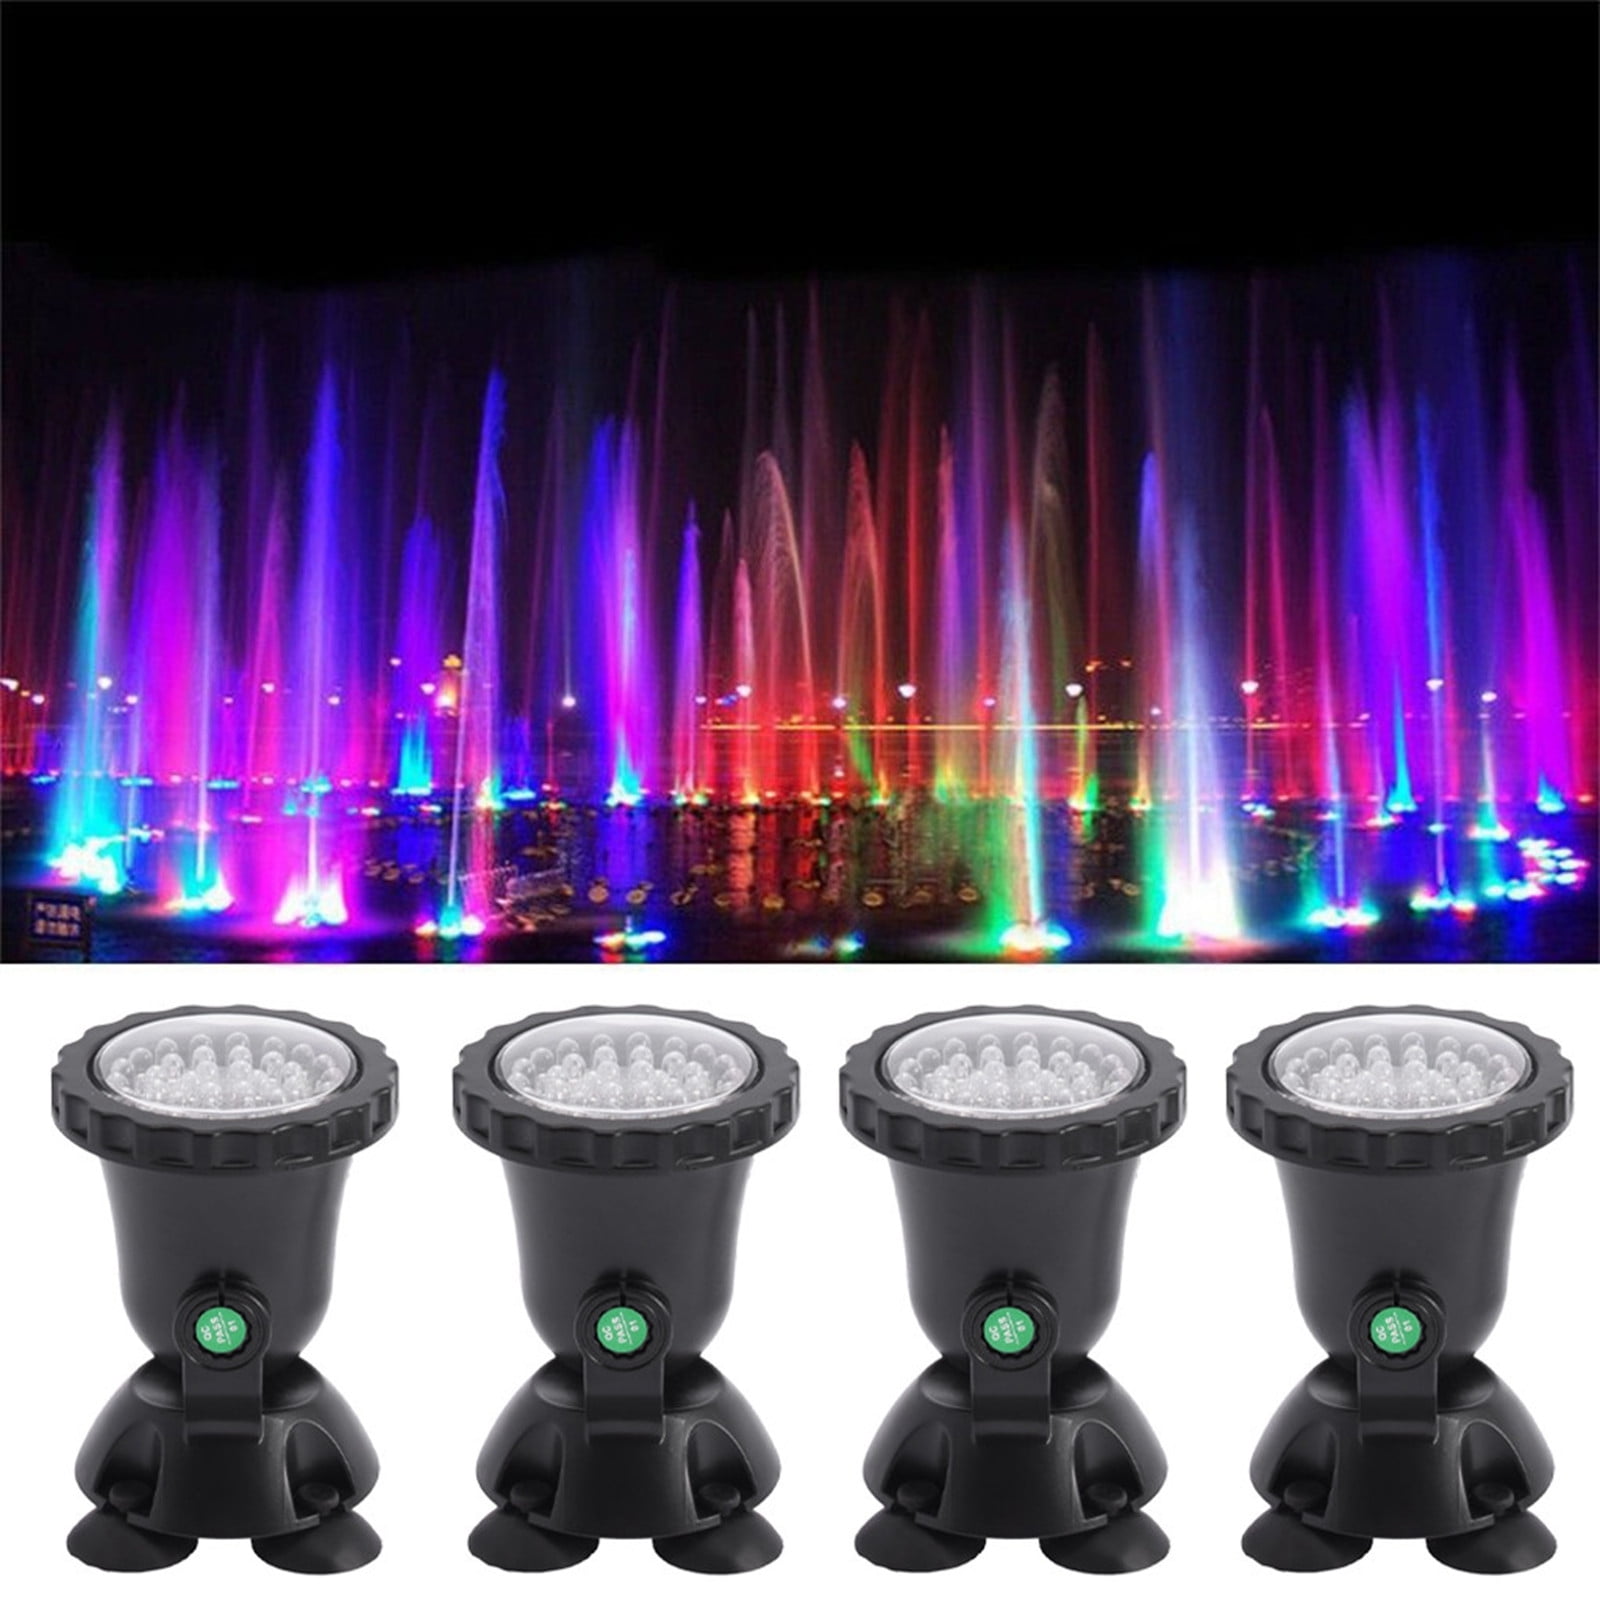 LED Garden Pond Light Submersible Spot Lamp with Remote Control RGB Color Changing Underwater Light 36 LEDs IP68 Waterproof for Fountain Pool Aquarium Fish Tank Decoration